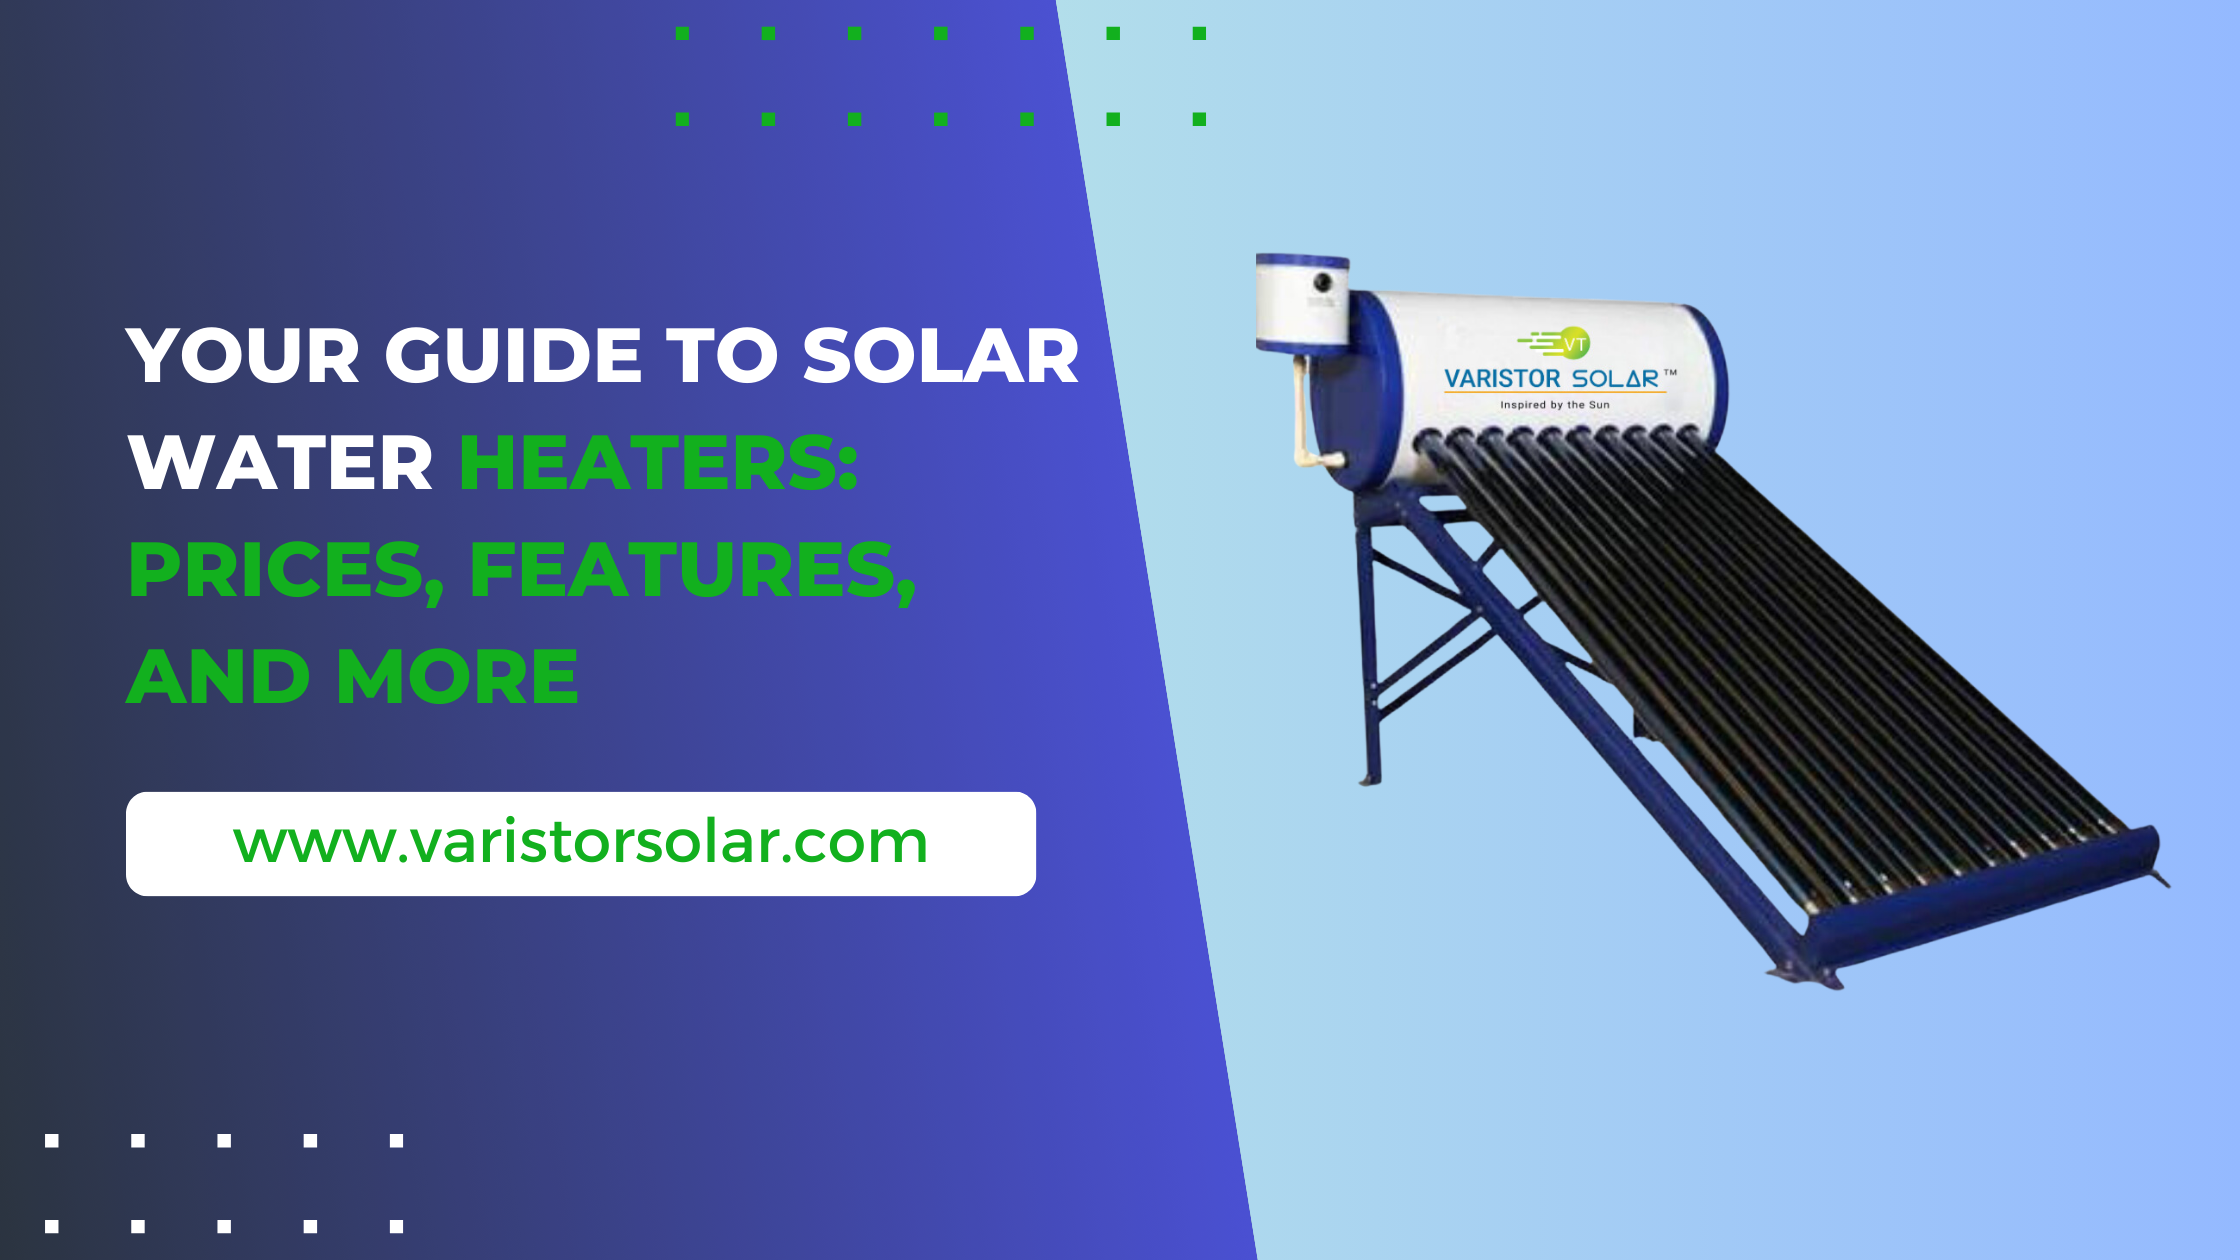 Your Guide to Solar Water Heaters: Prices, Features, and More